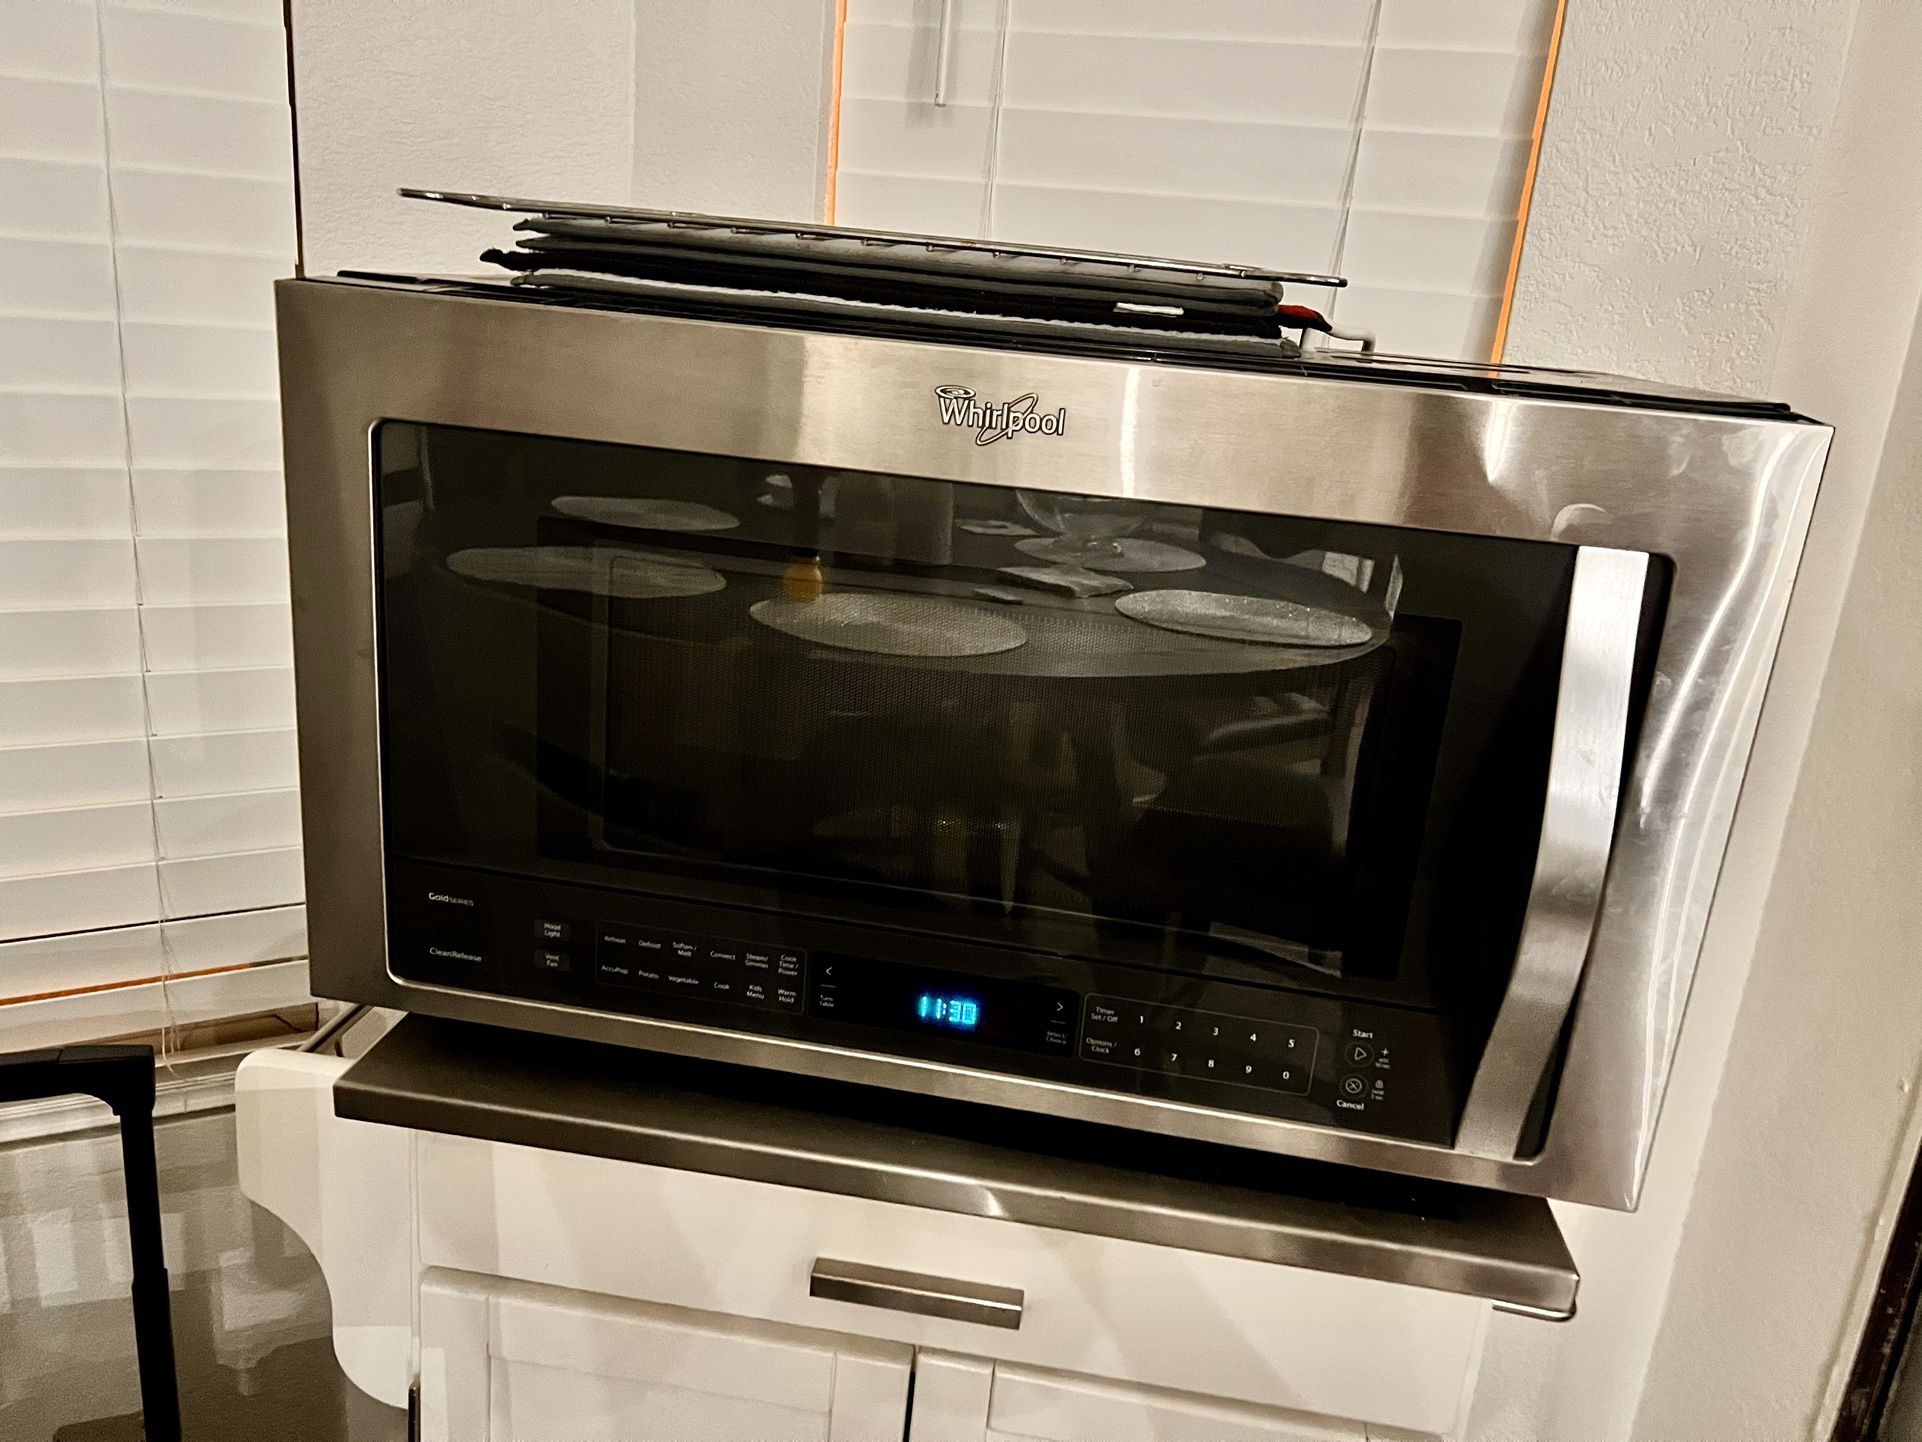 Whirlpool Convection/ Microwave